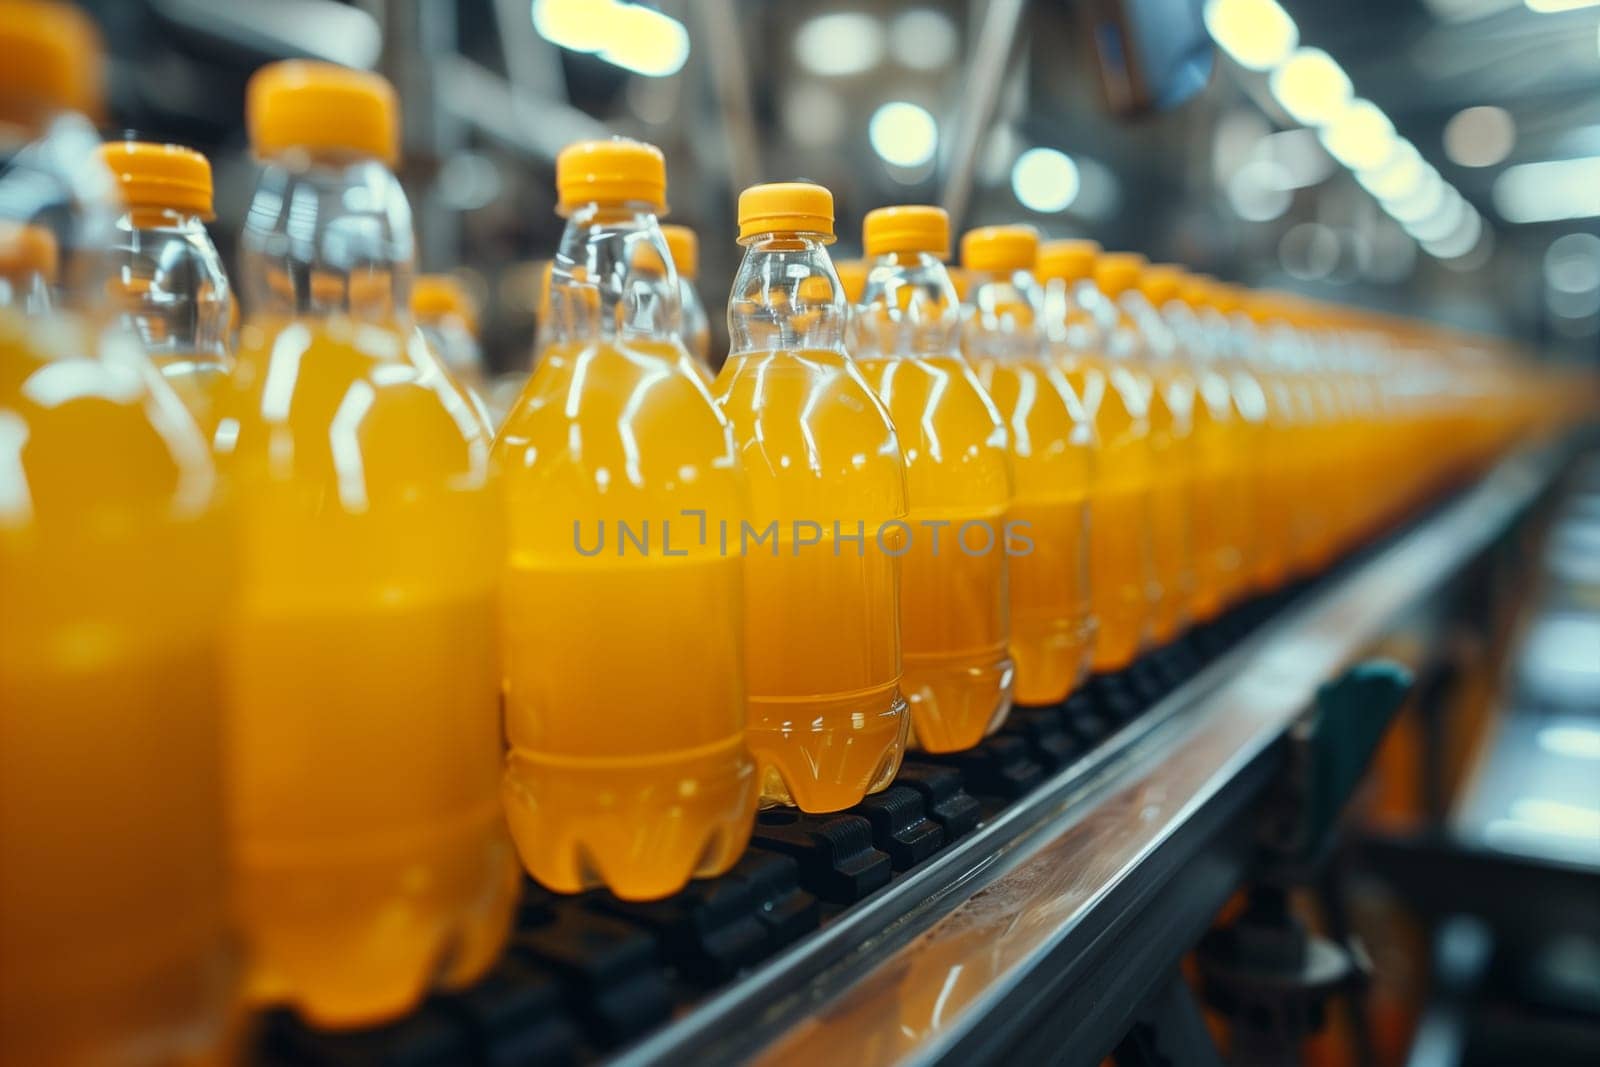 A line of orange juice bottles is moving along a conveyor belt in a factory setting.